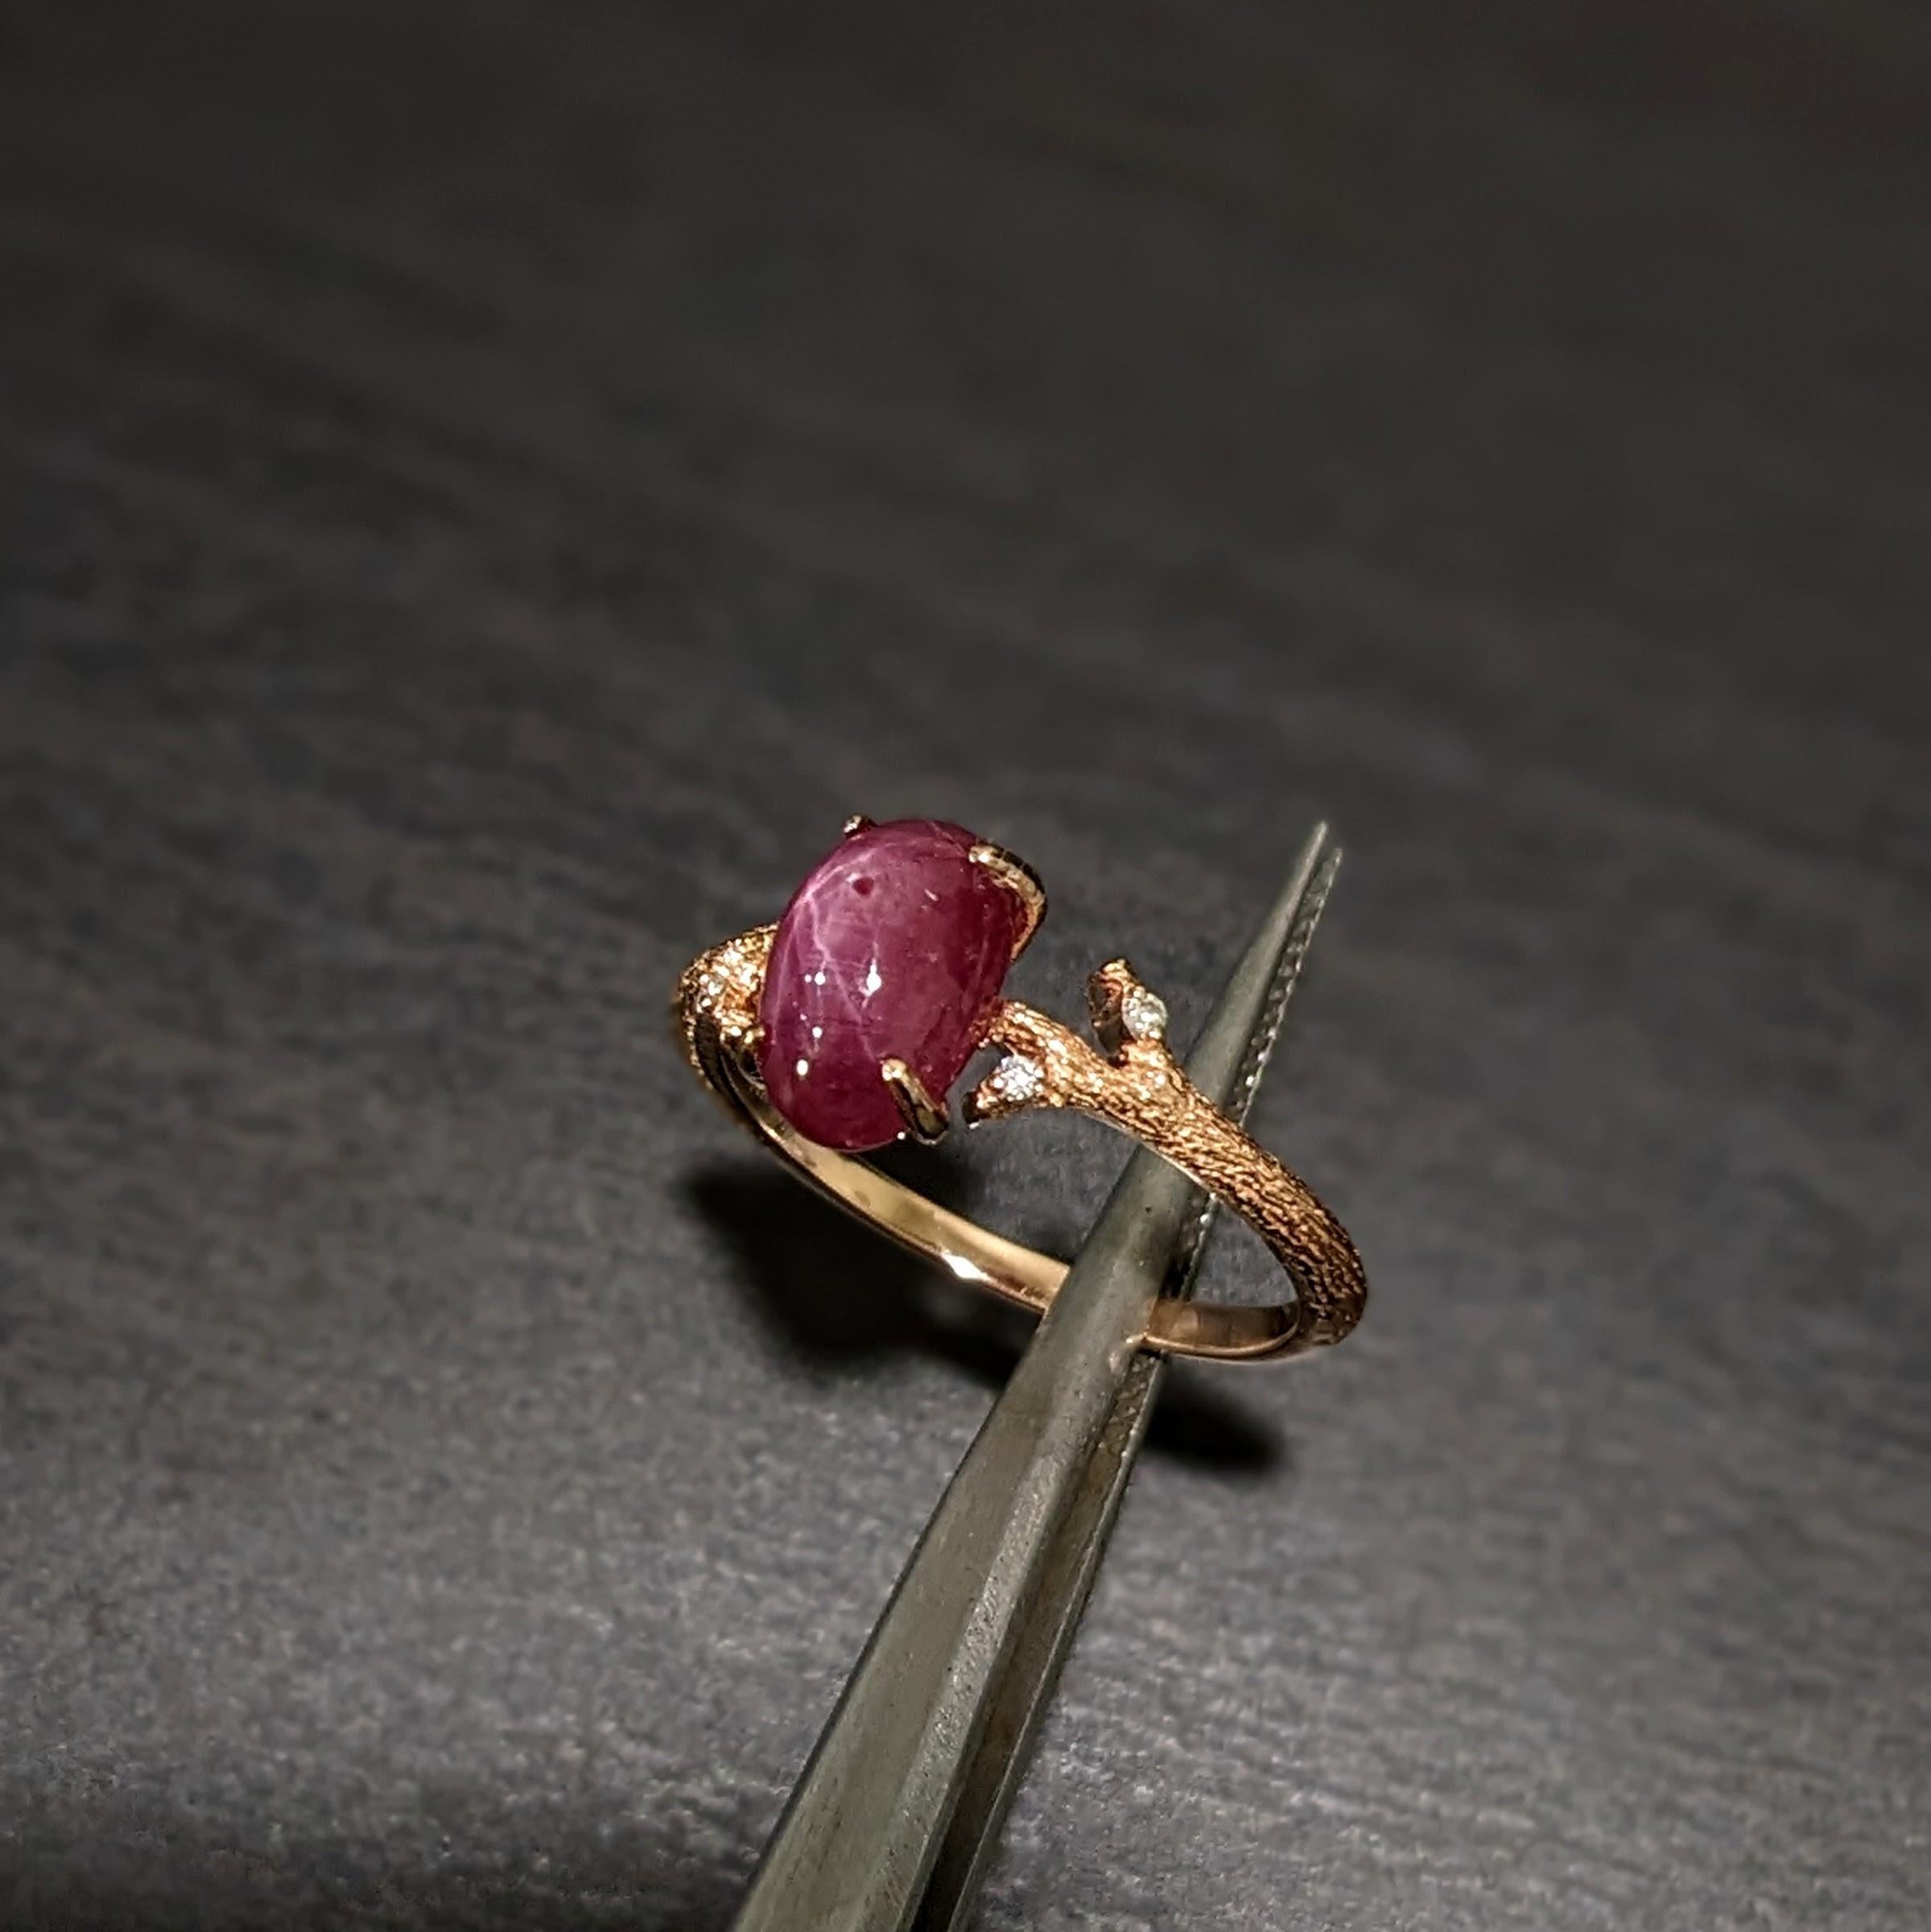 A star ruby is a type of gemstone that displays a six-rayed star when light is shone onto it. Star rubies are unique and mystical gemstones. This art deco oval star ruby ring features a stunning red 2.89ct star ruby in a single prong setting with